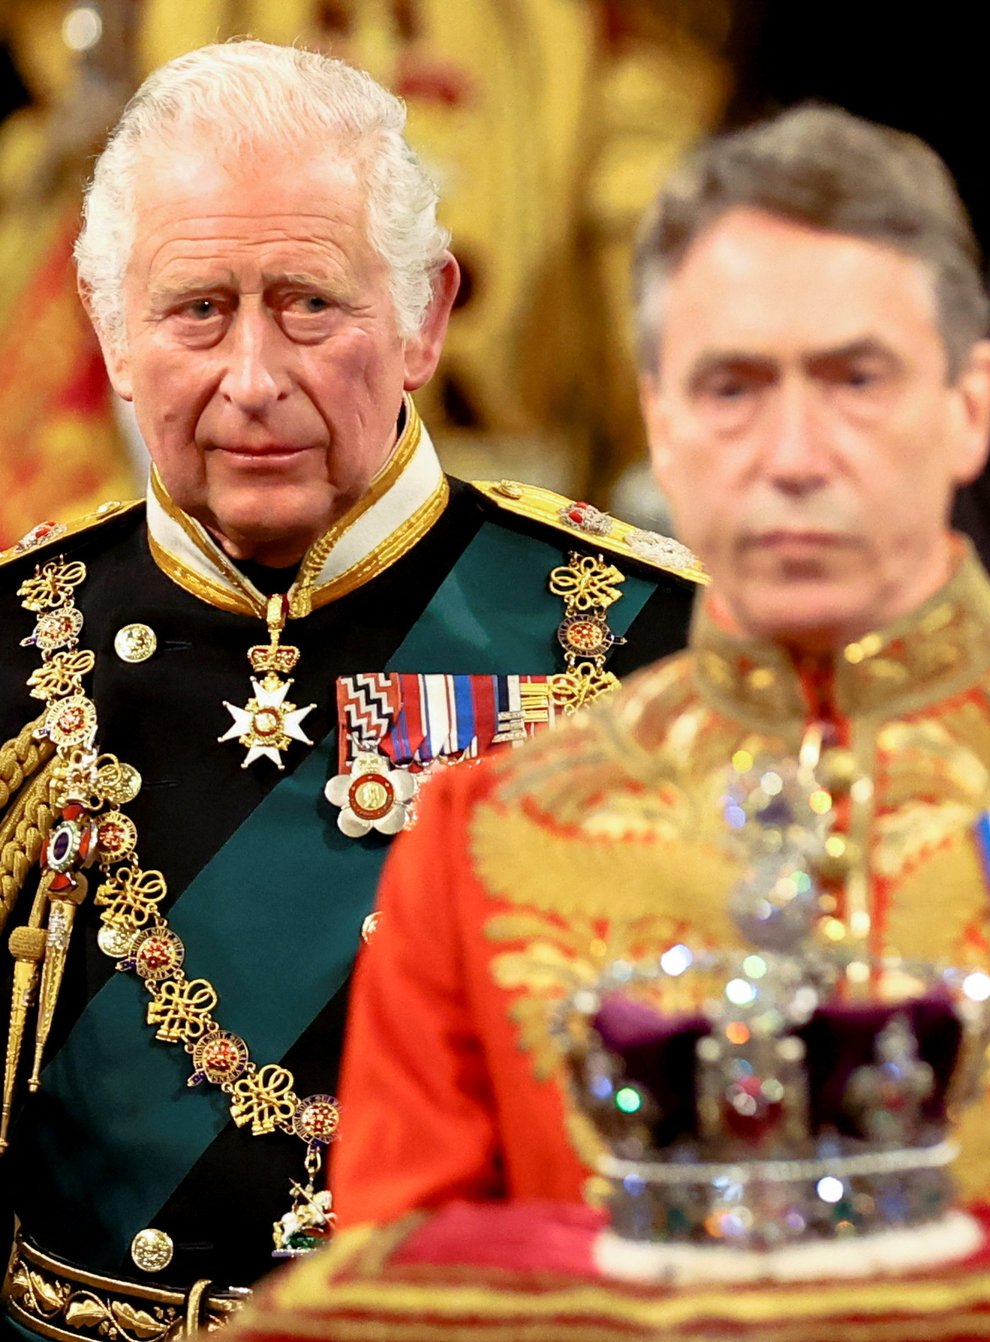 The Prince of Wales proceeds behind the Imperial State Crown through the Royal Gallery during the State Opening of Parliament in the House of Lords, London (Hannah McKay/PA)